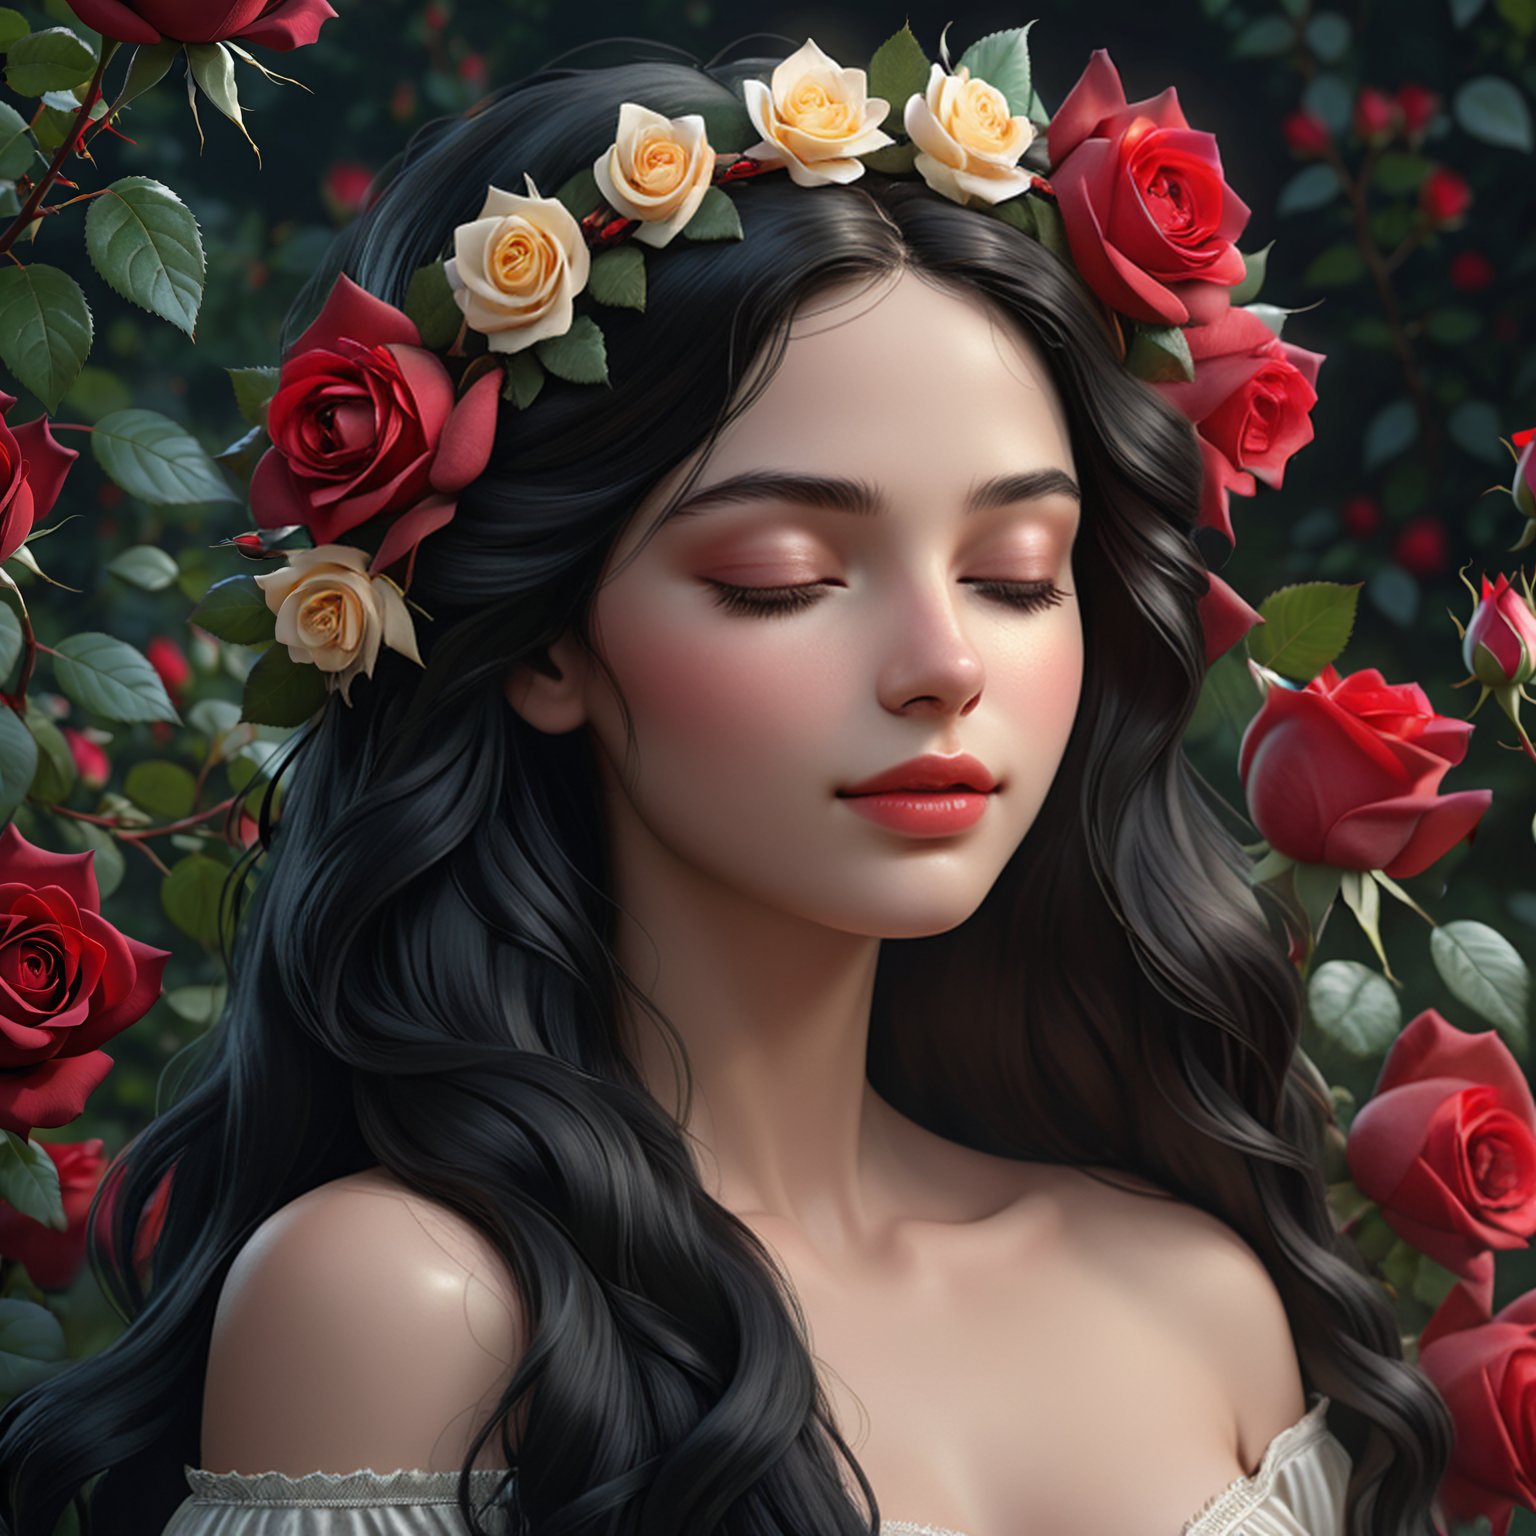 Hyperrealistic art (masterpiece, best quality, ultra-detailed,  8K), high detail,  realisitc detailed, a beautiful young woman with long flowy black hair over off shoulders,  wreath,  radiant and beautiful eyes,  gently closed eyes,  pale soft skin,  kind smile,  glossy lips, details of colorful red roses, a serene and contemplative mood, dark botanical background, fashion shoot, cinematic pose . Extremely high-resolution details, photographic, realism pushed to extreme, fine texture, incredibly lifelike